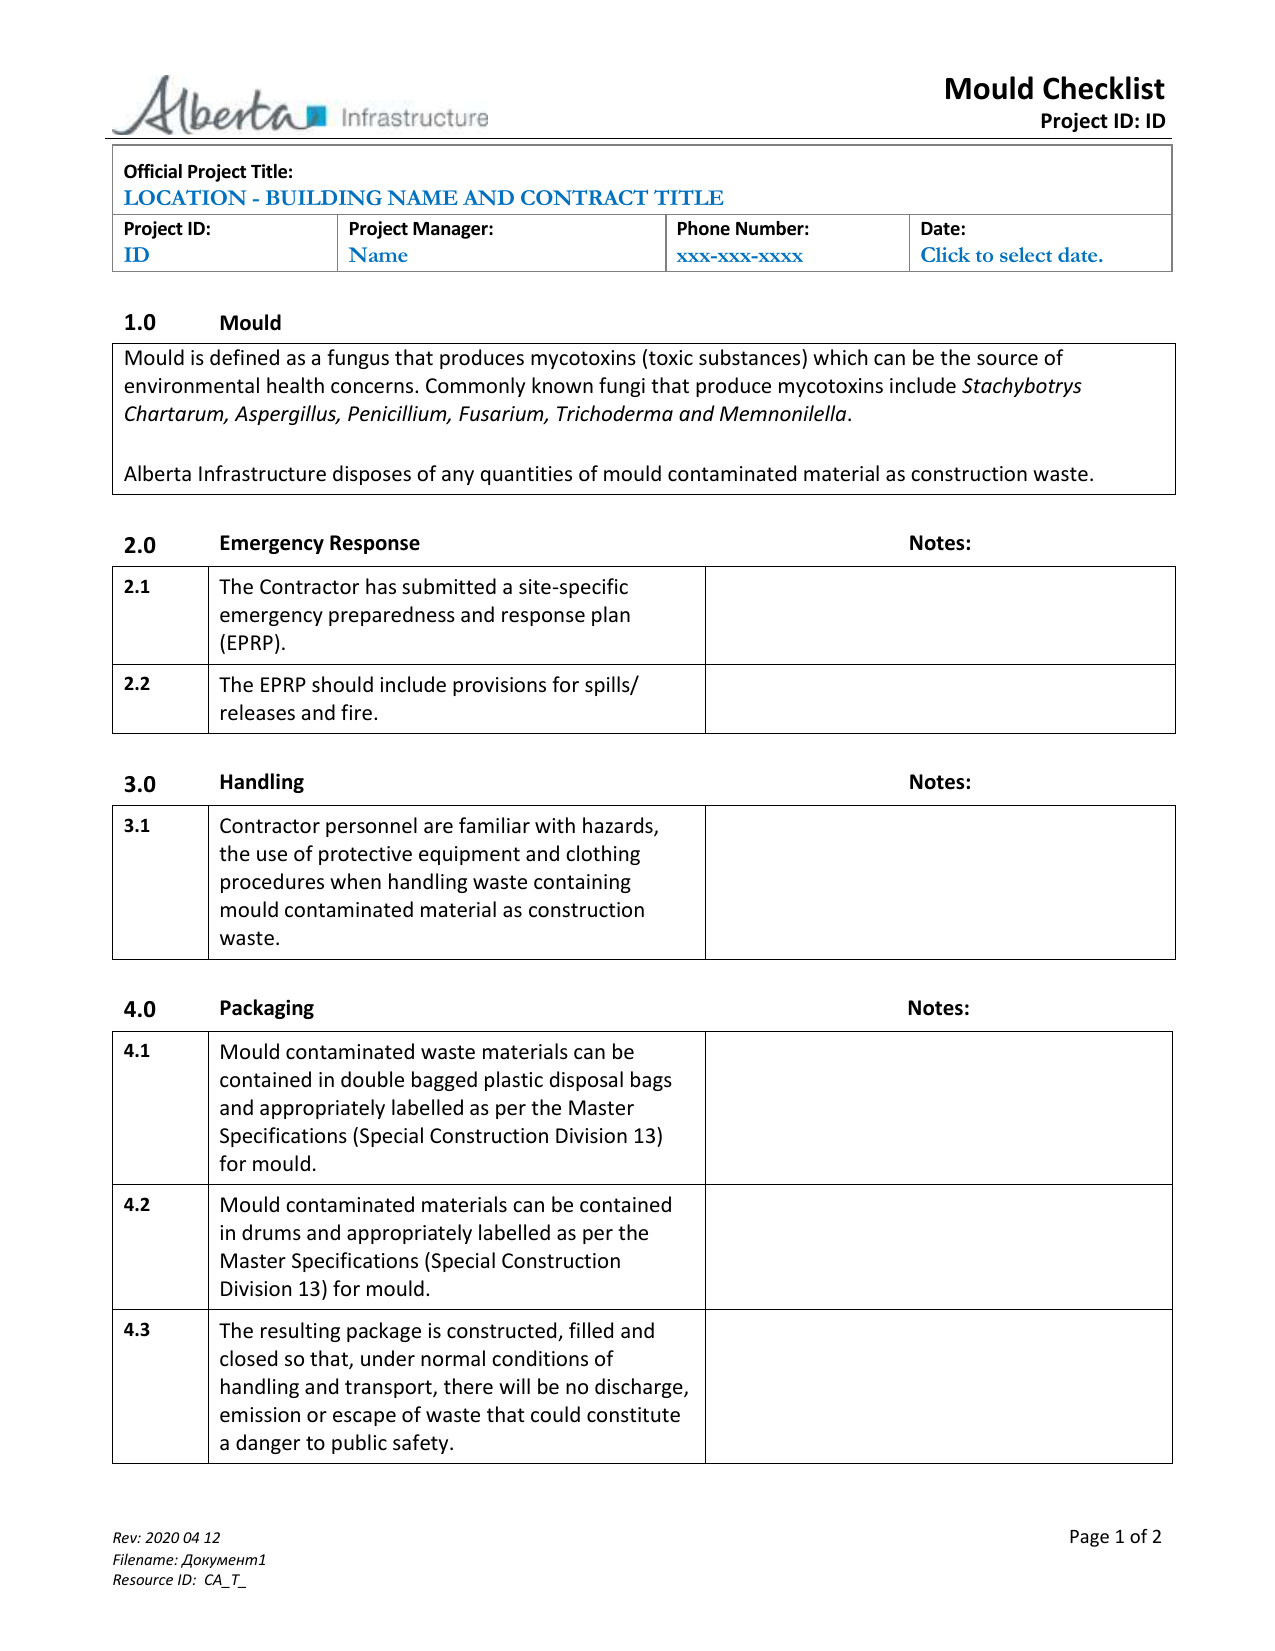 ems-mould-checklist-template-alberta-ministry-of-infrastructure